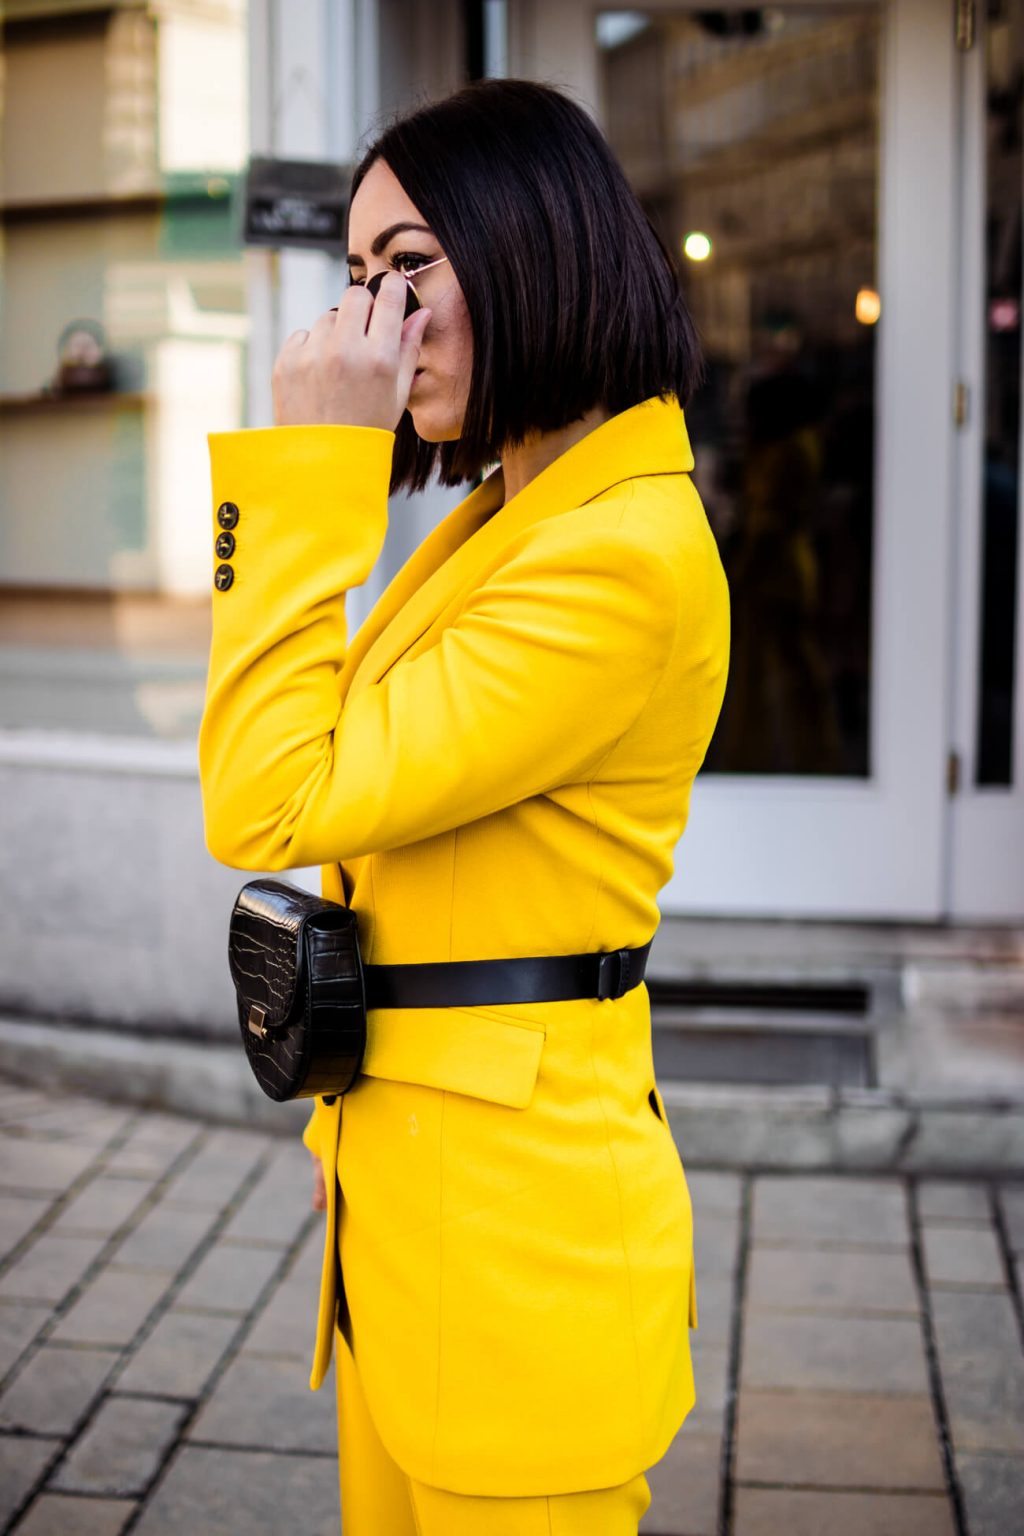 How to wear yellow?